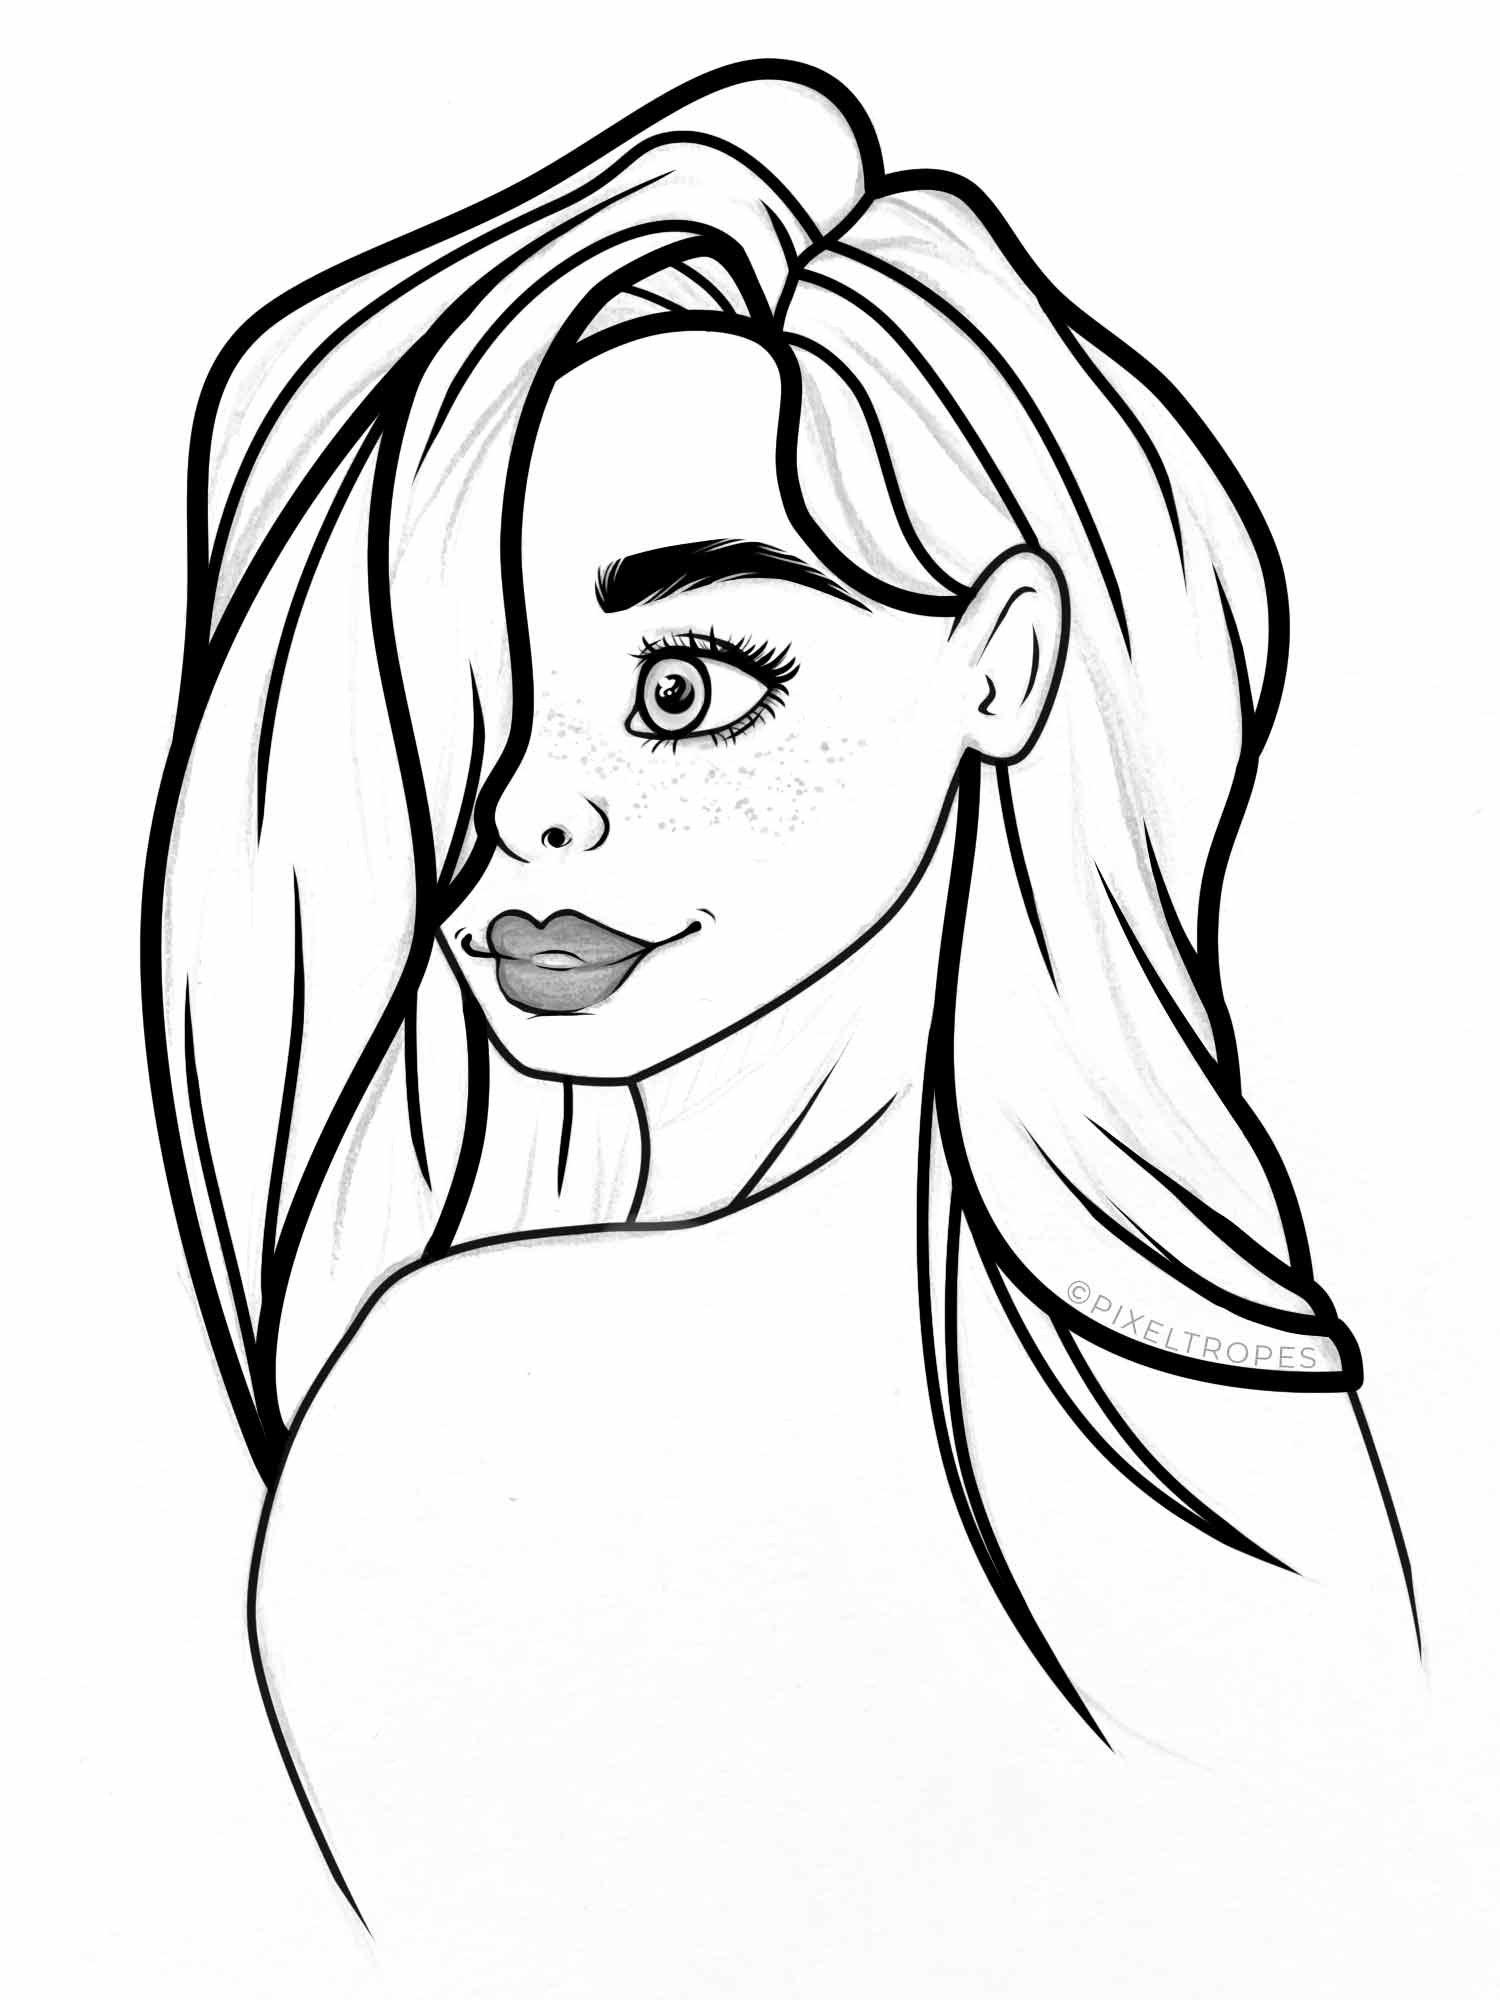 Hair with more details added, with sketch visible underneath